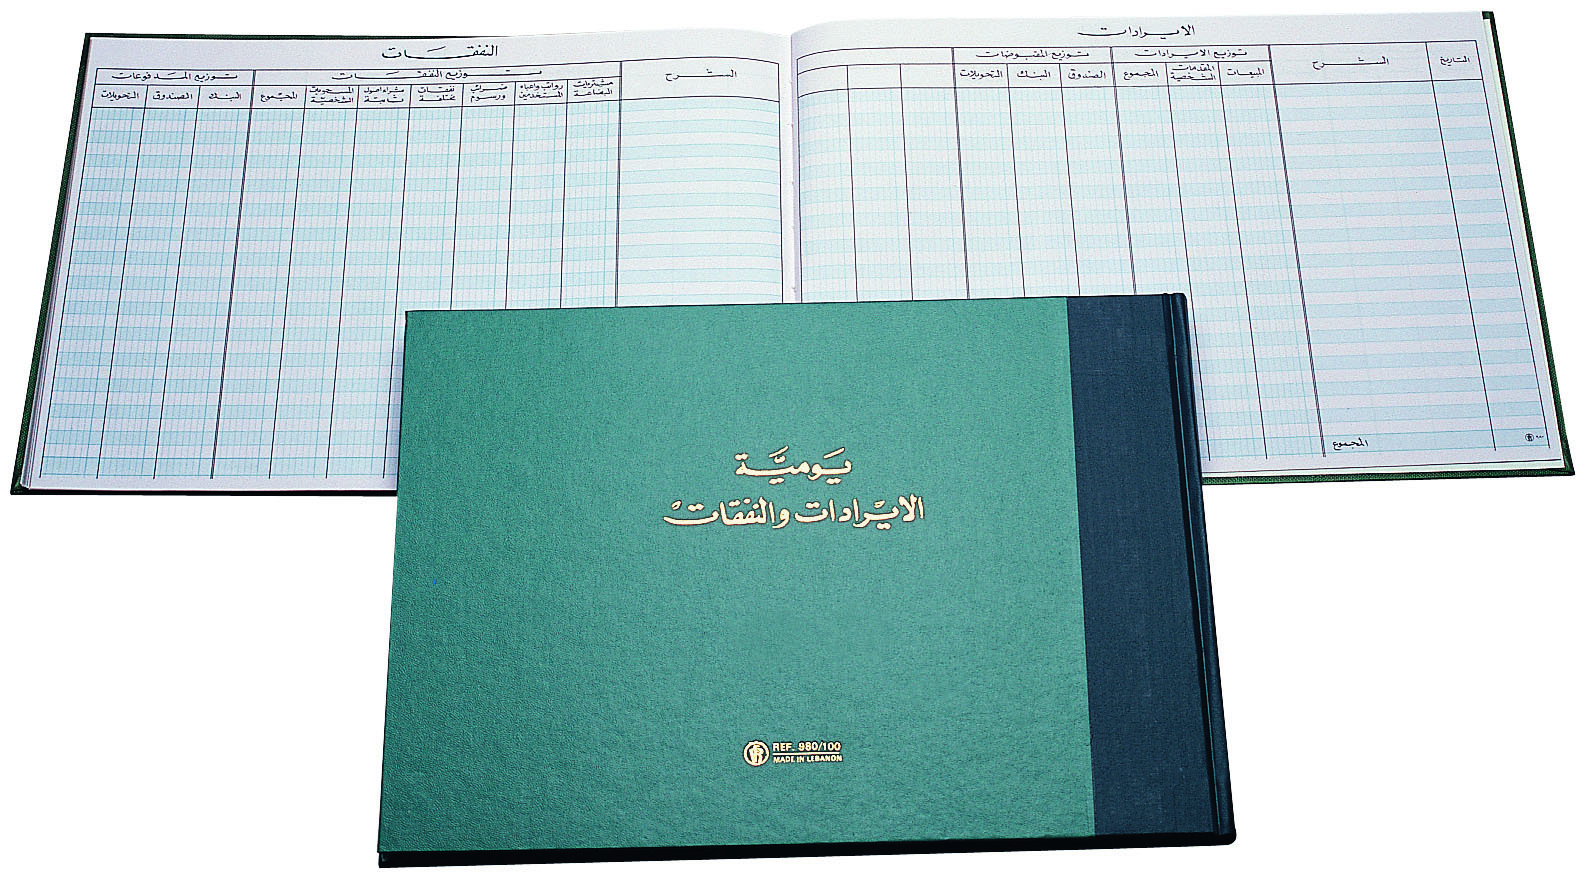 +Receipt and Expense book (50 sheets)